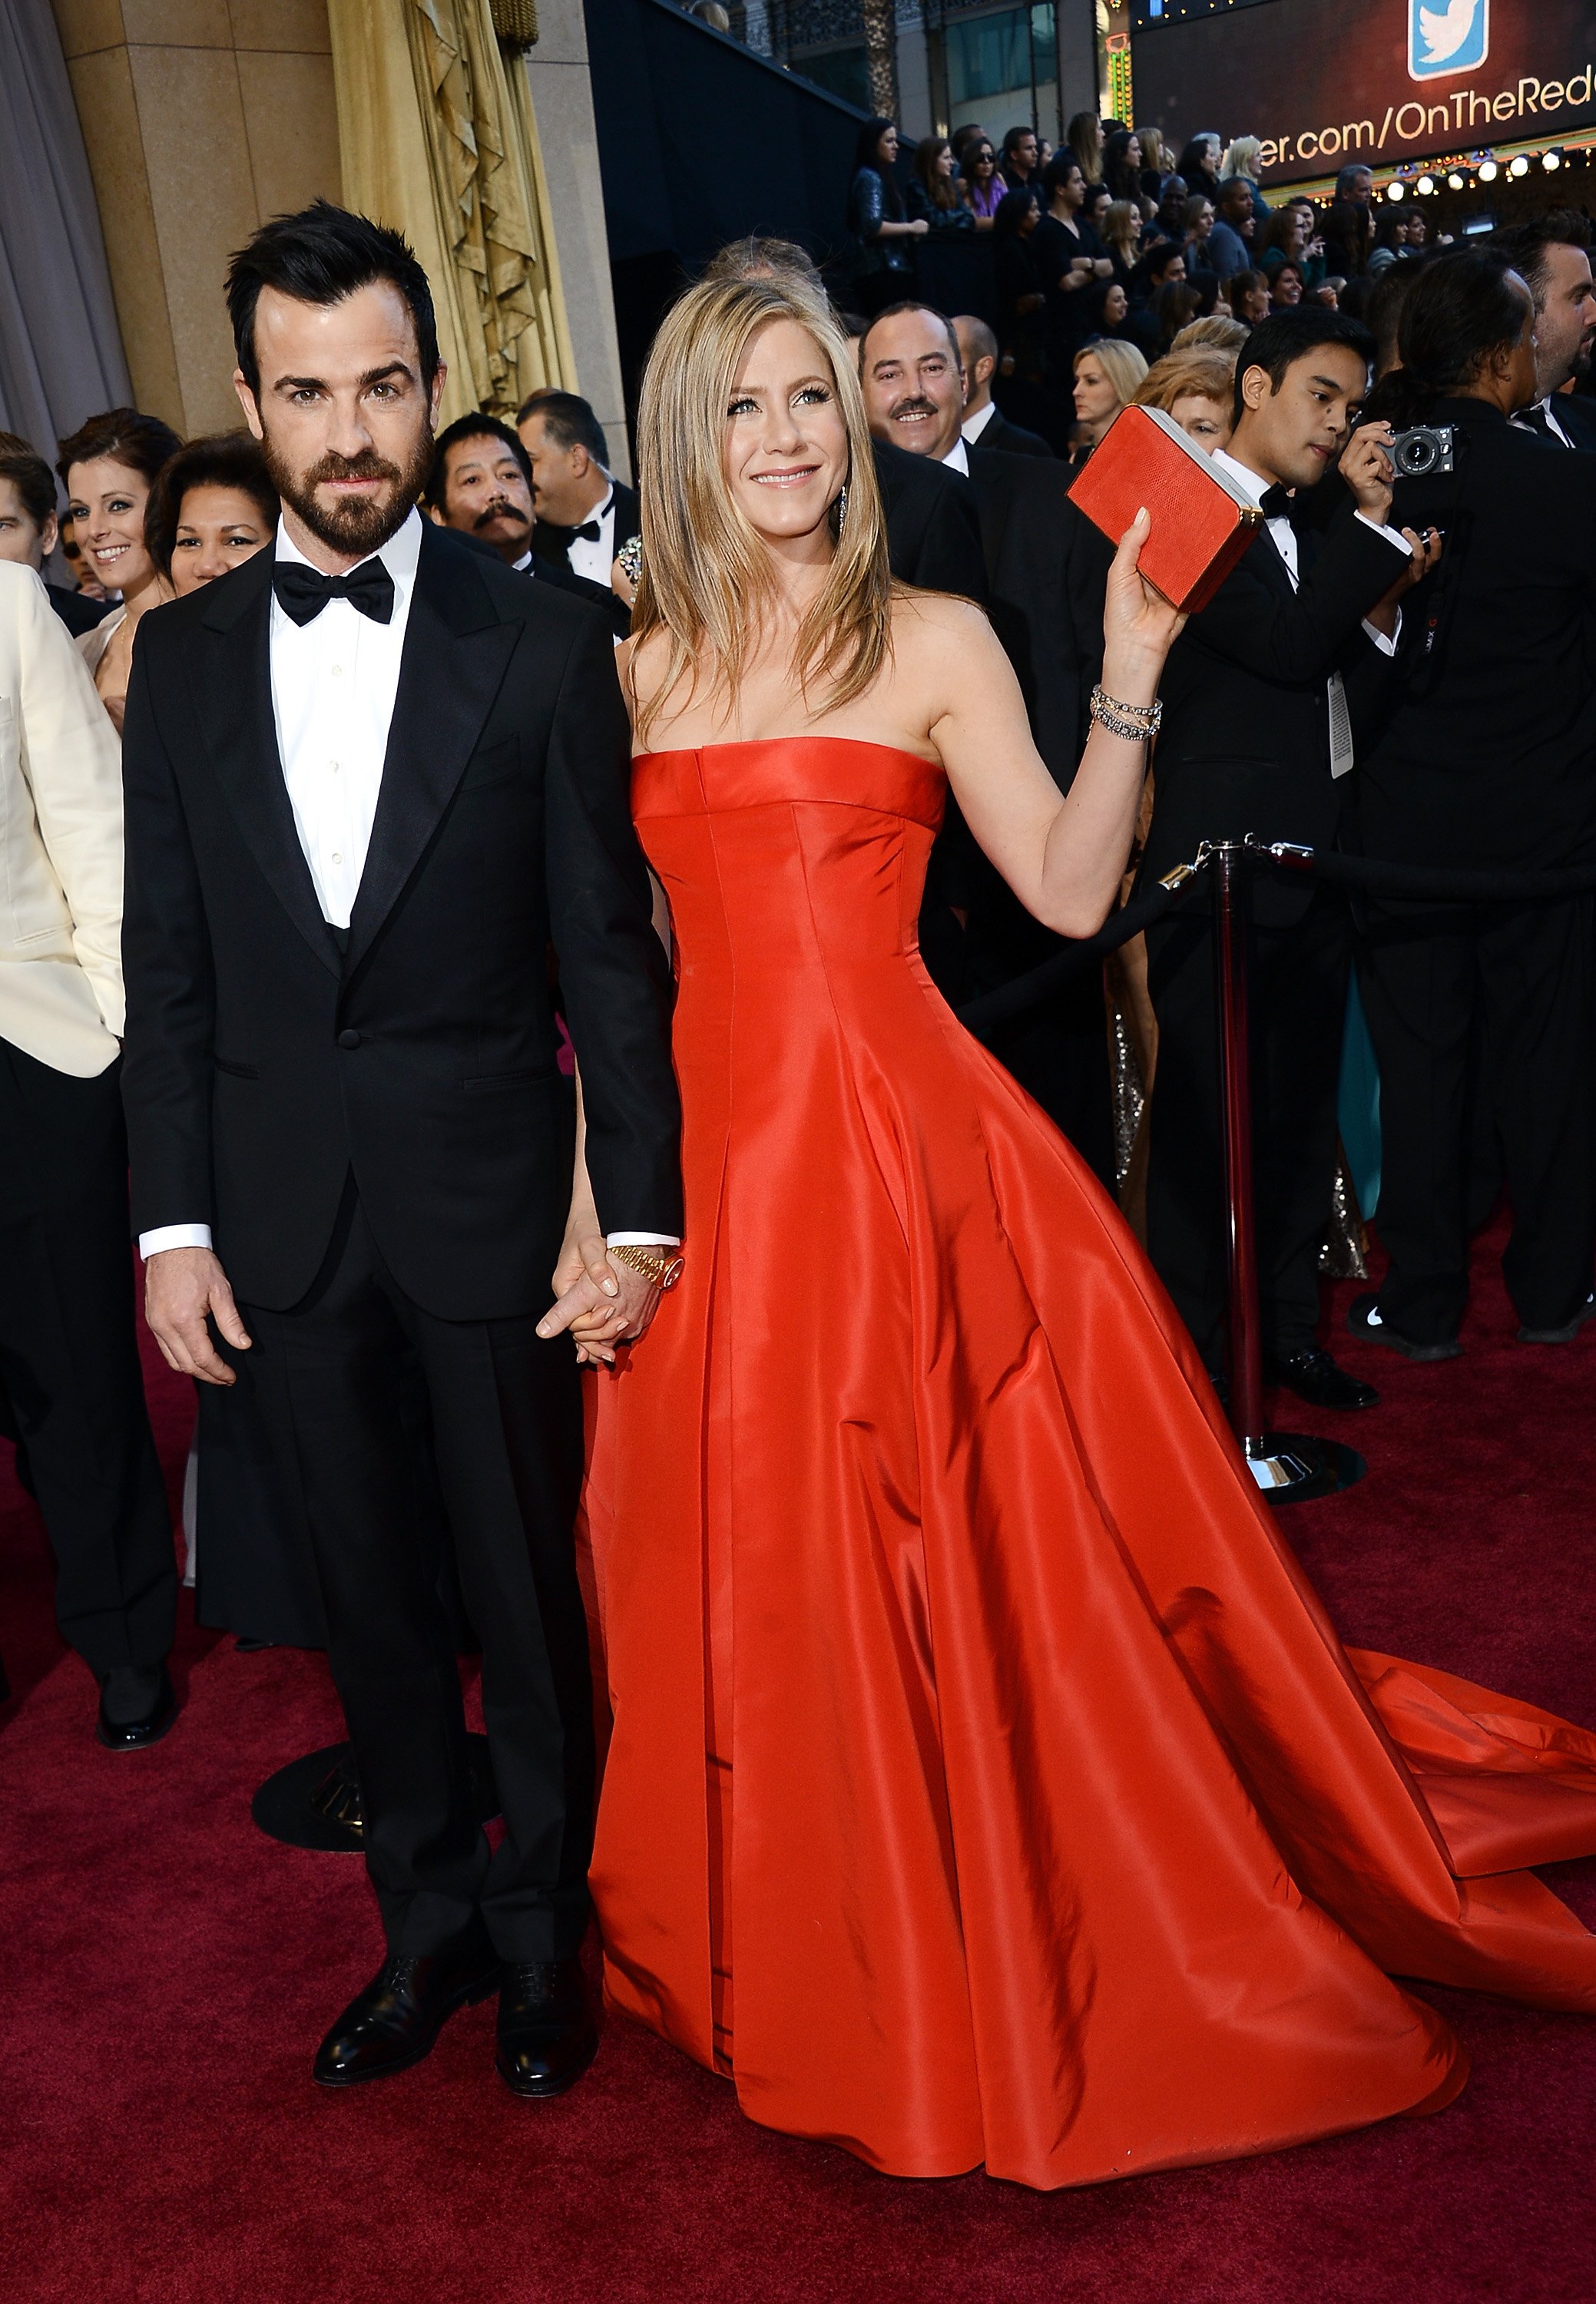 Justin Theroux and Jennifer Aniston arrive at the Oscars at Hollywood & Highland Center on February 24, 2013, in Hollywood, California. | Source: Getty Images.